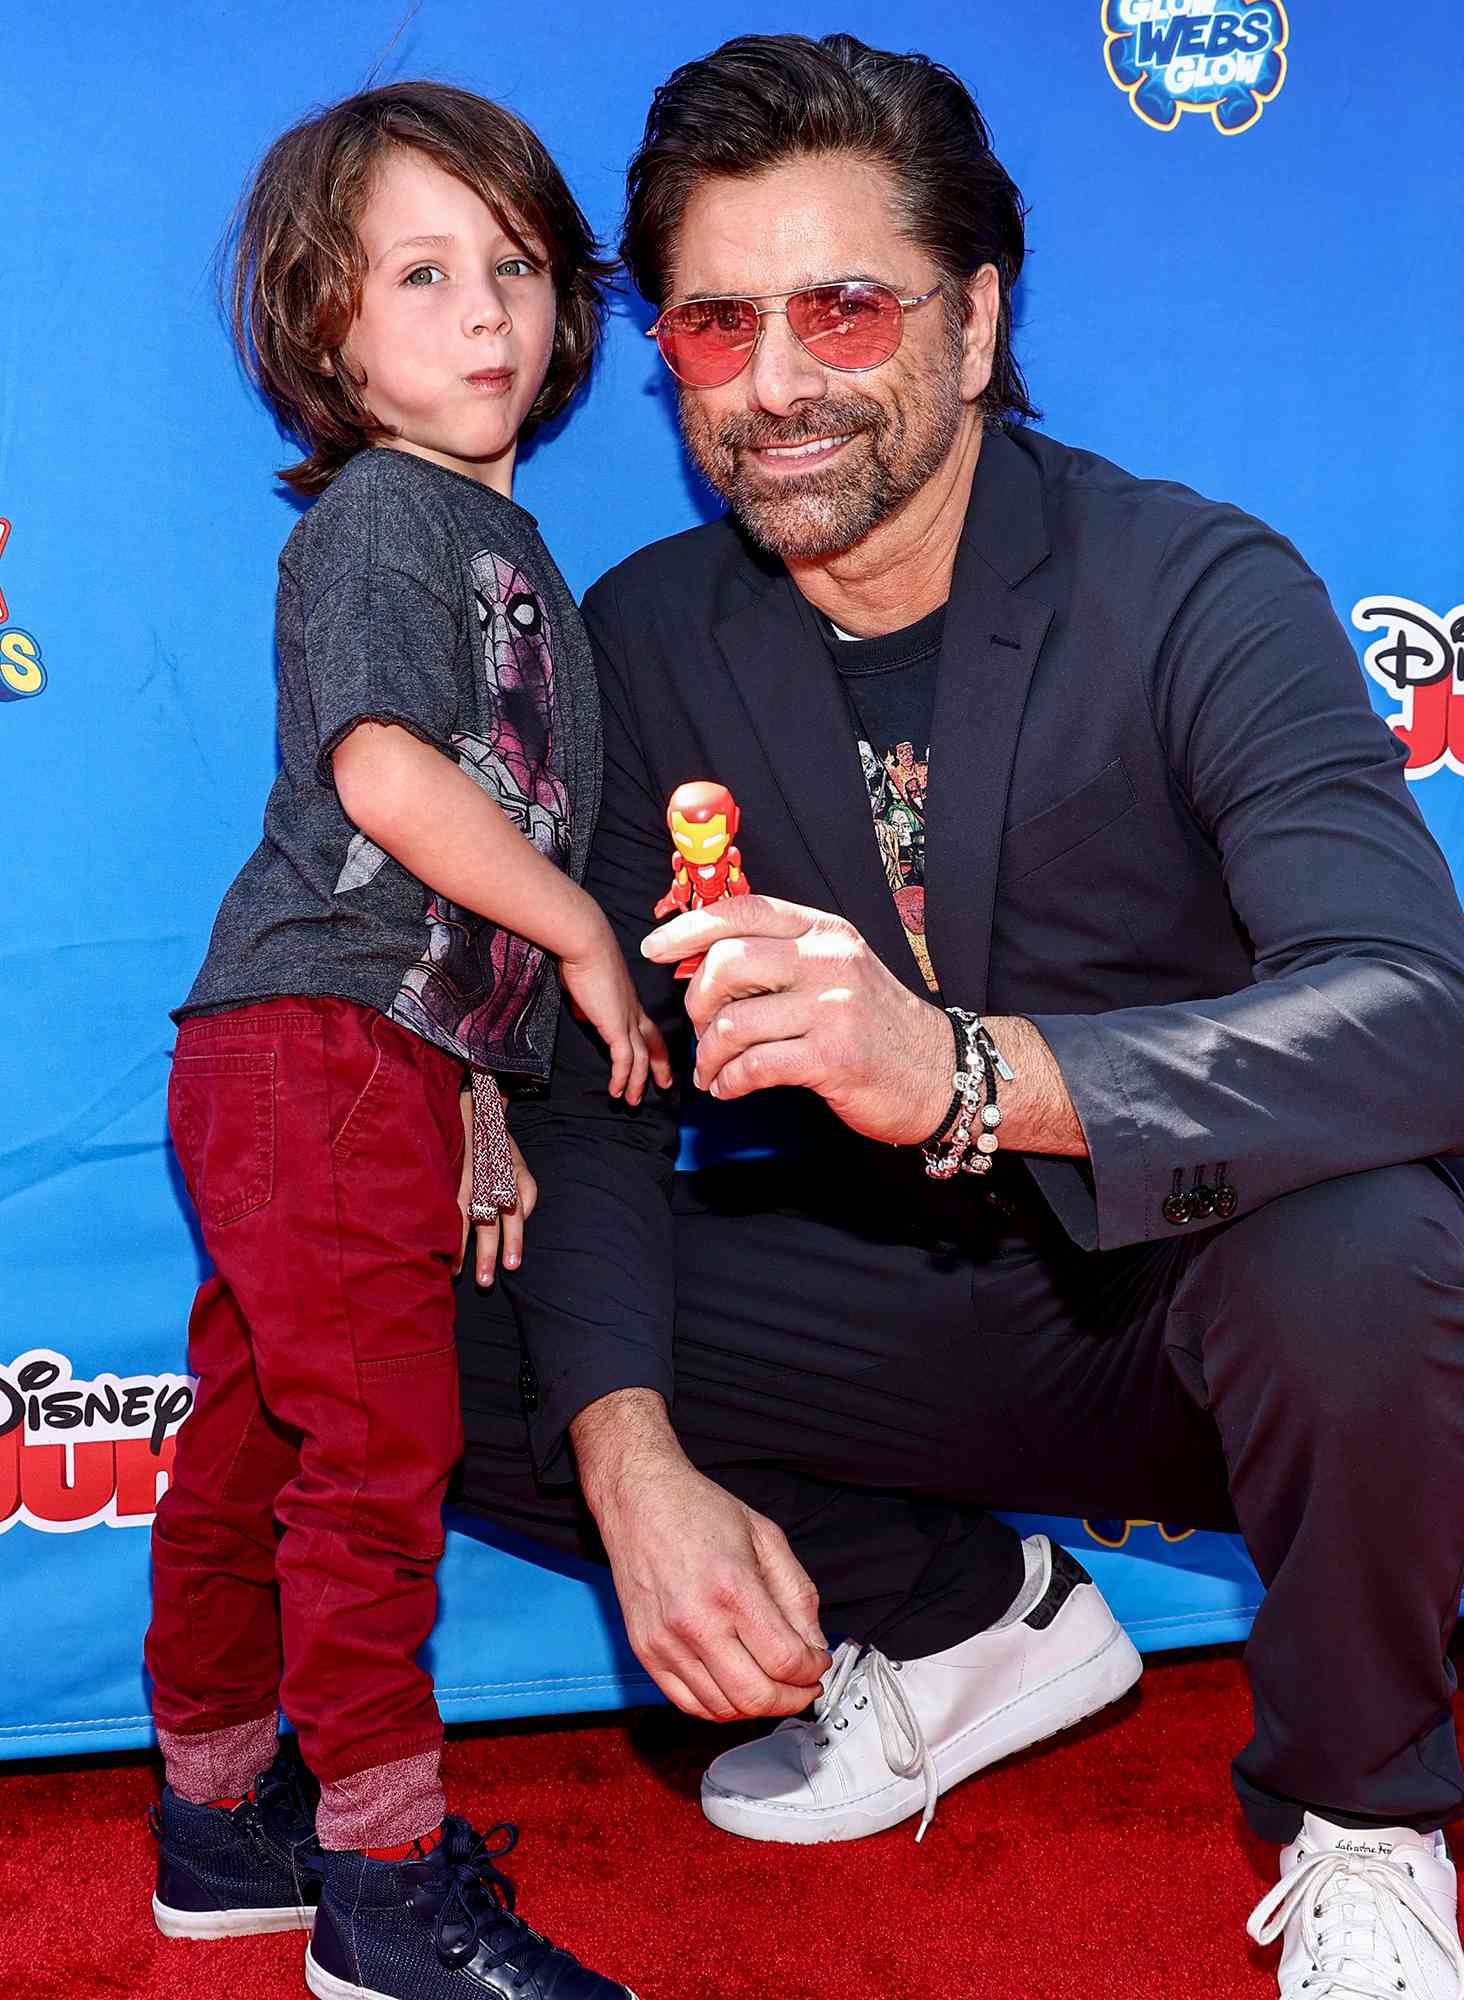 John Stamos and his son, Billy Stamos